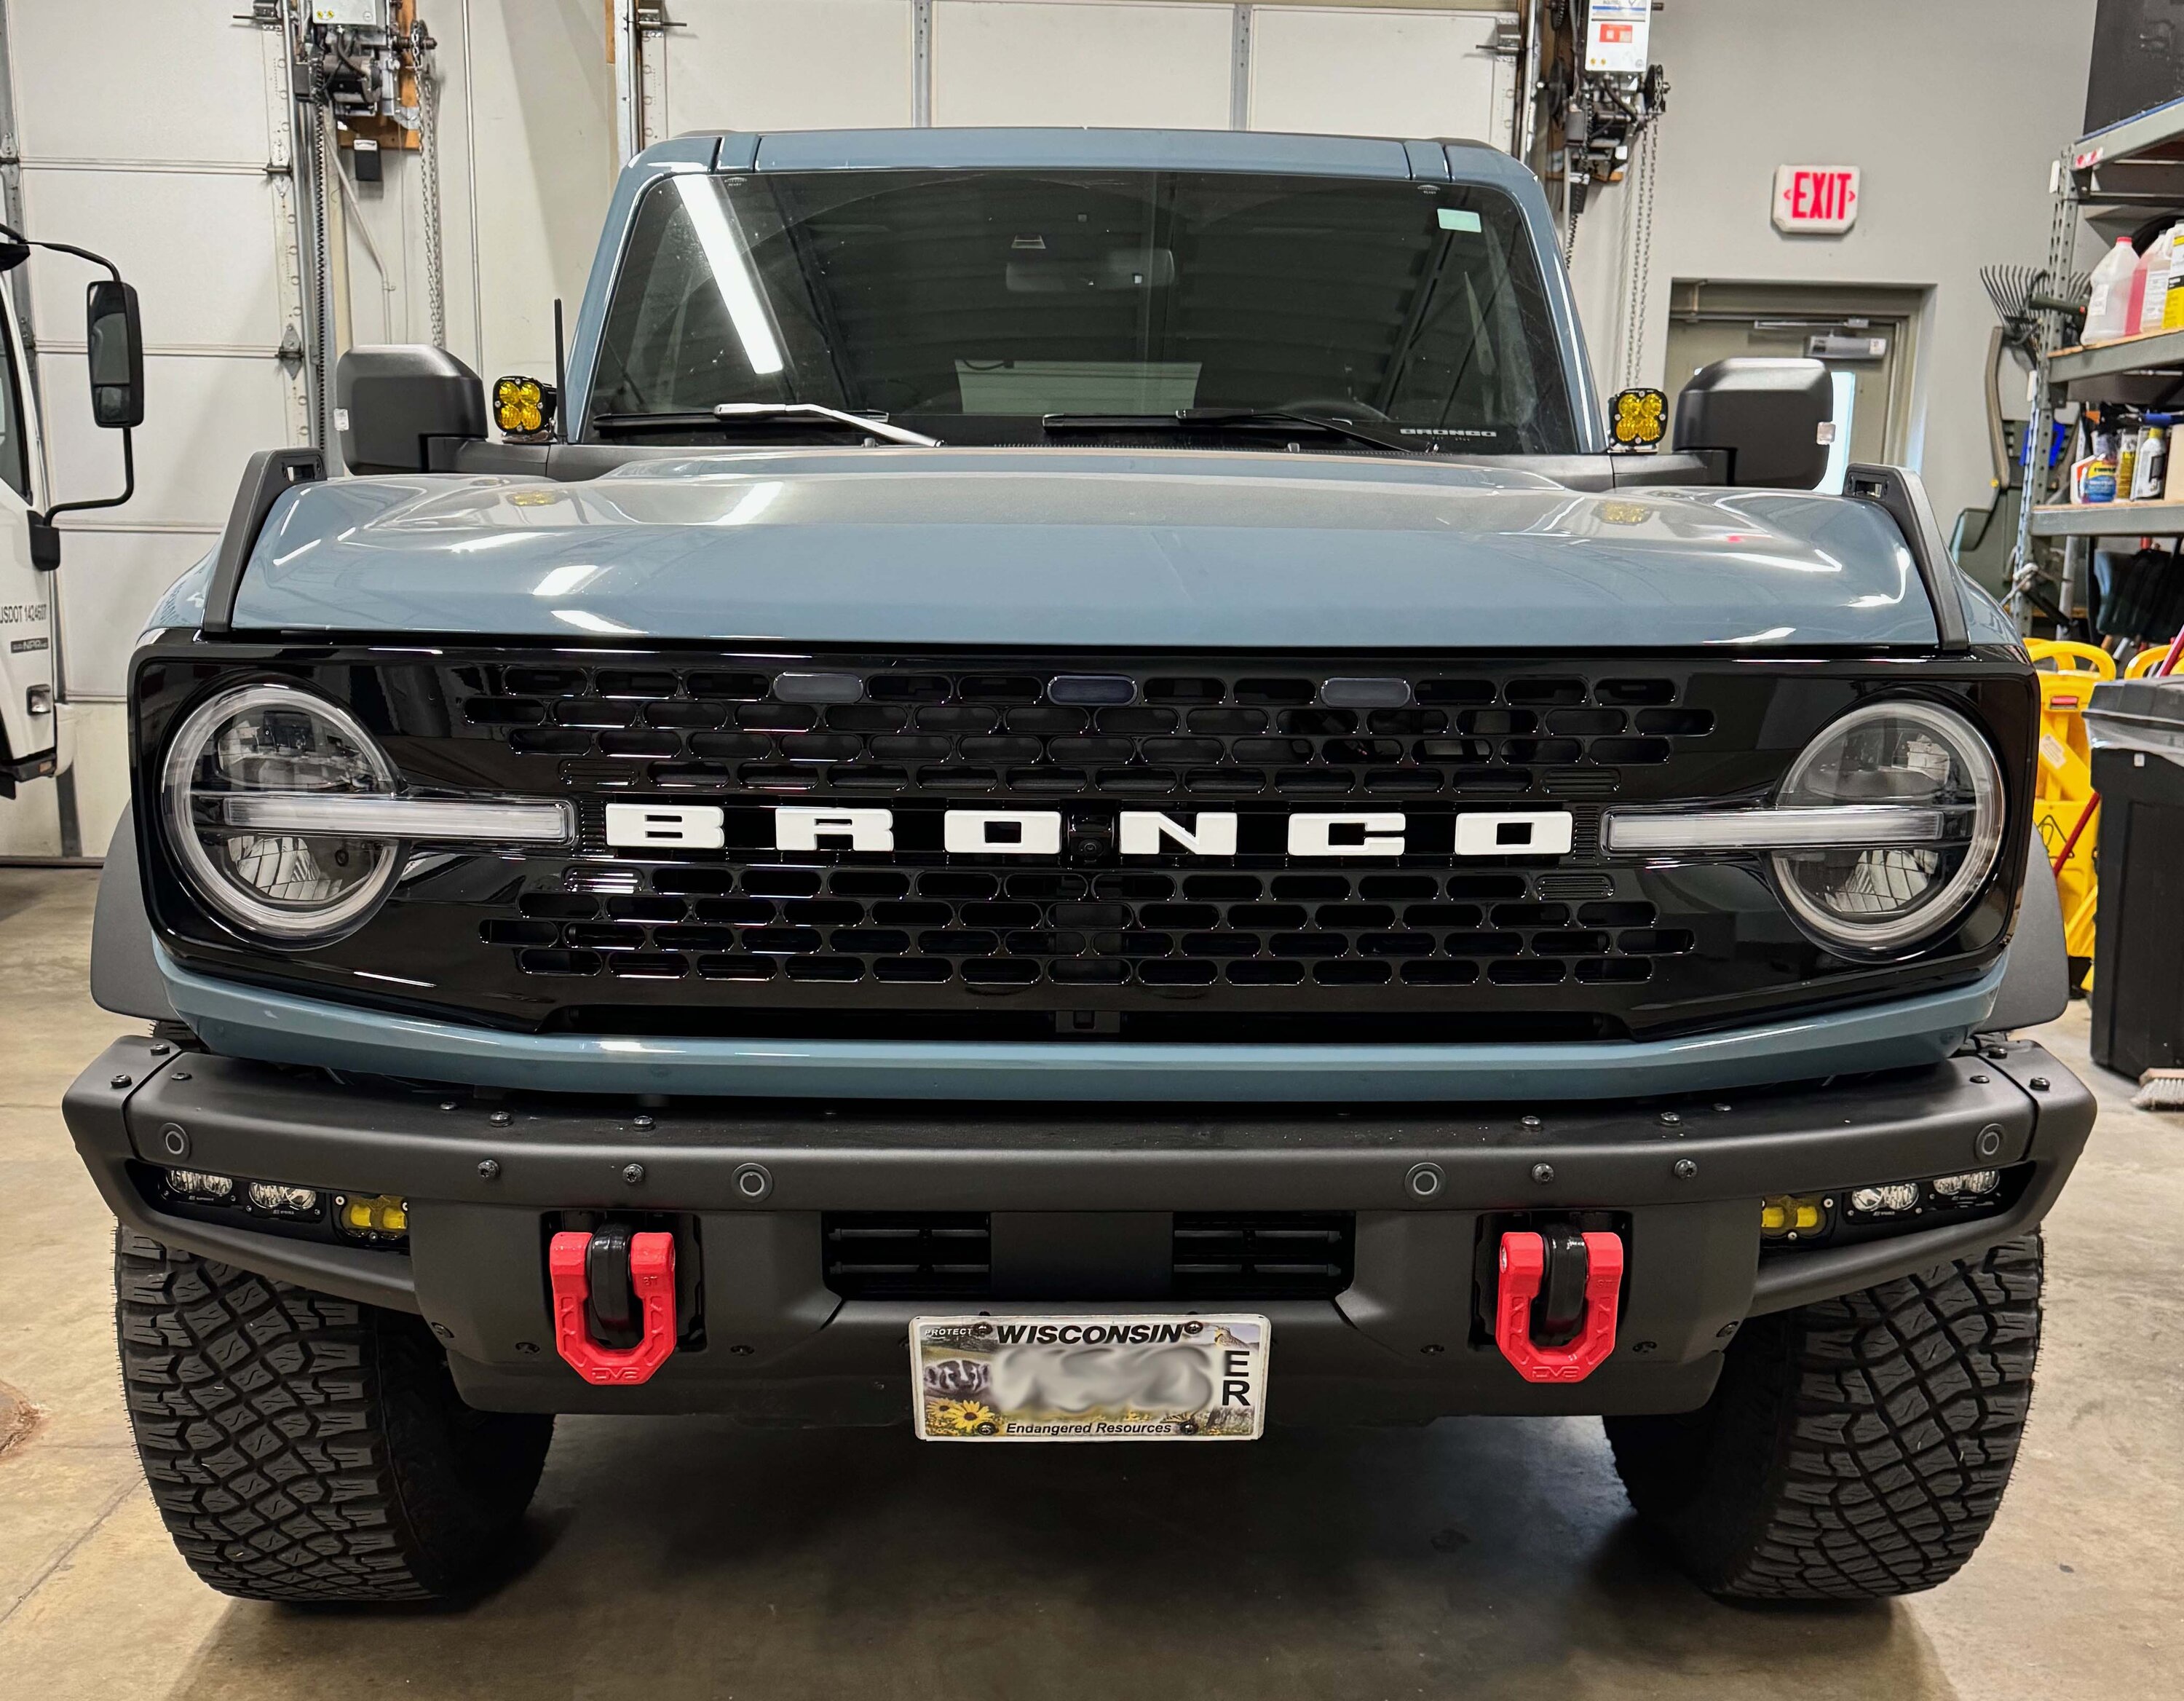 Ford Bronco New Product Announcement - SPV SMOKED Grille Marker Lights... off